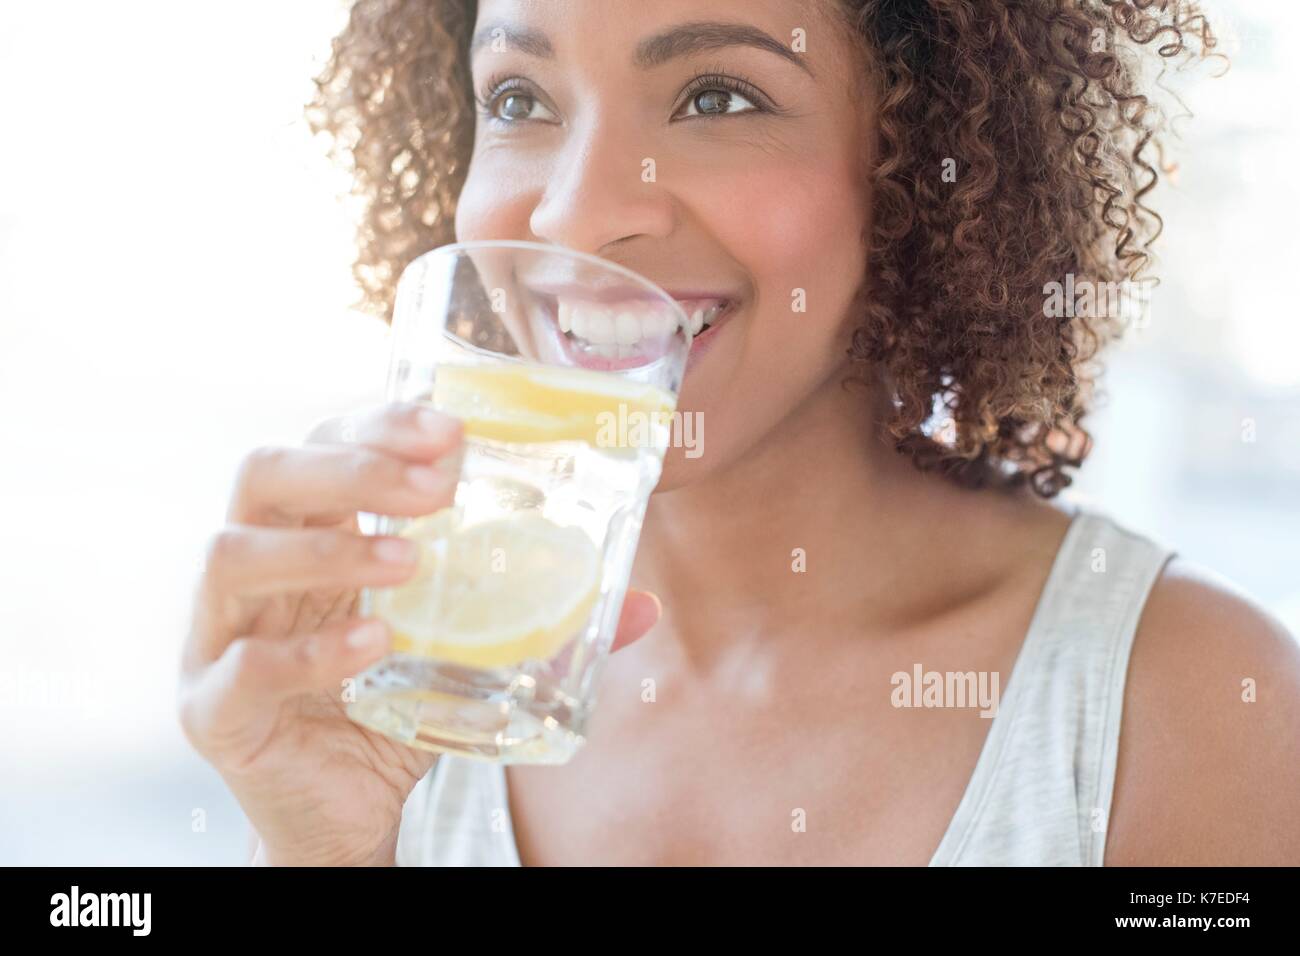 Mid adult woman drinking water with a slice of lemon. Stock Photo